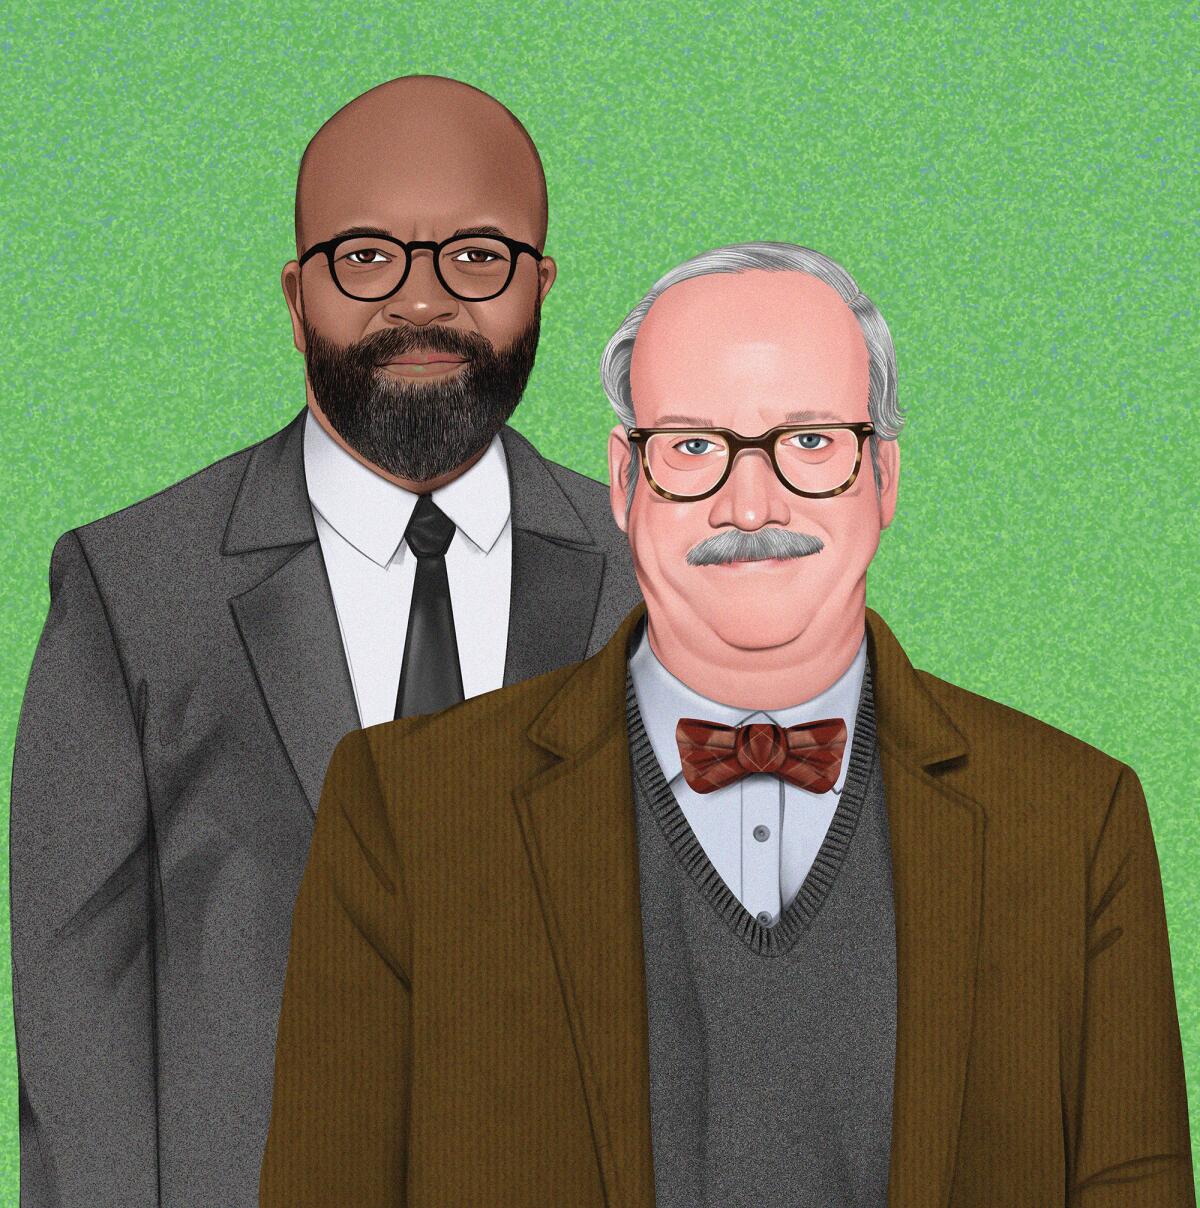 Illustration of Jeffrey Wright and Paul Giamatti as their characters from "American Fiction" and "The Holdovers."